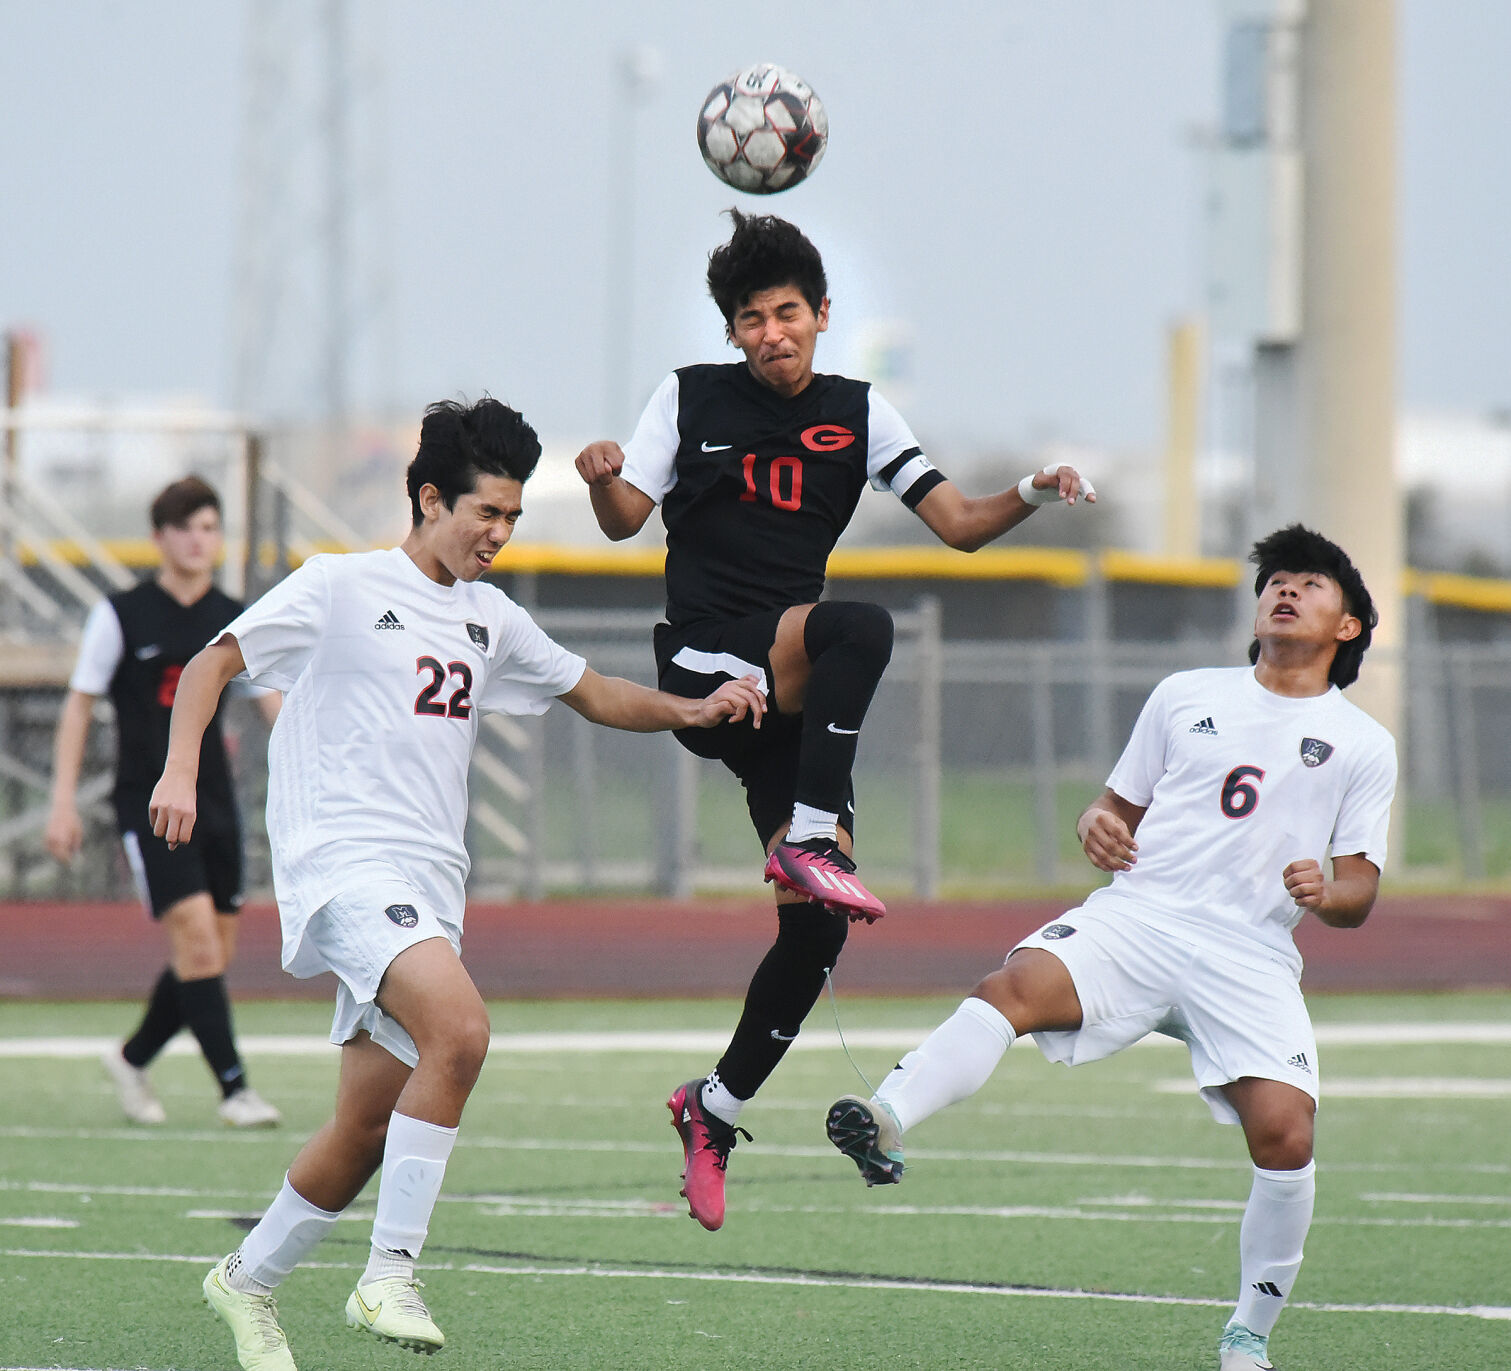 Caleb Salazar Leads Greenville Lions to 7-0 Victory with Four Goals